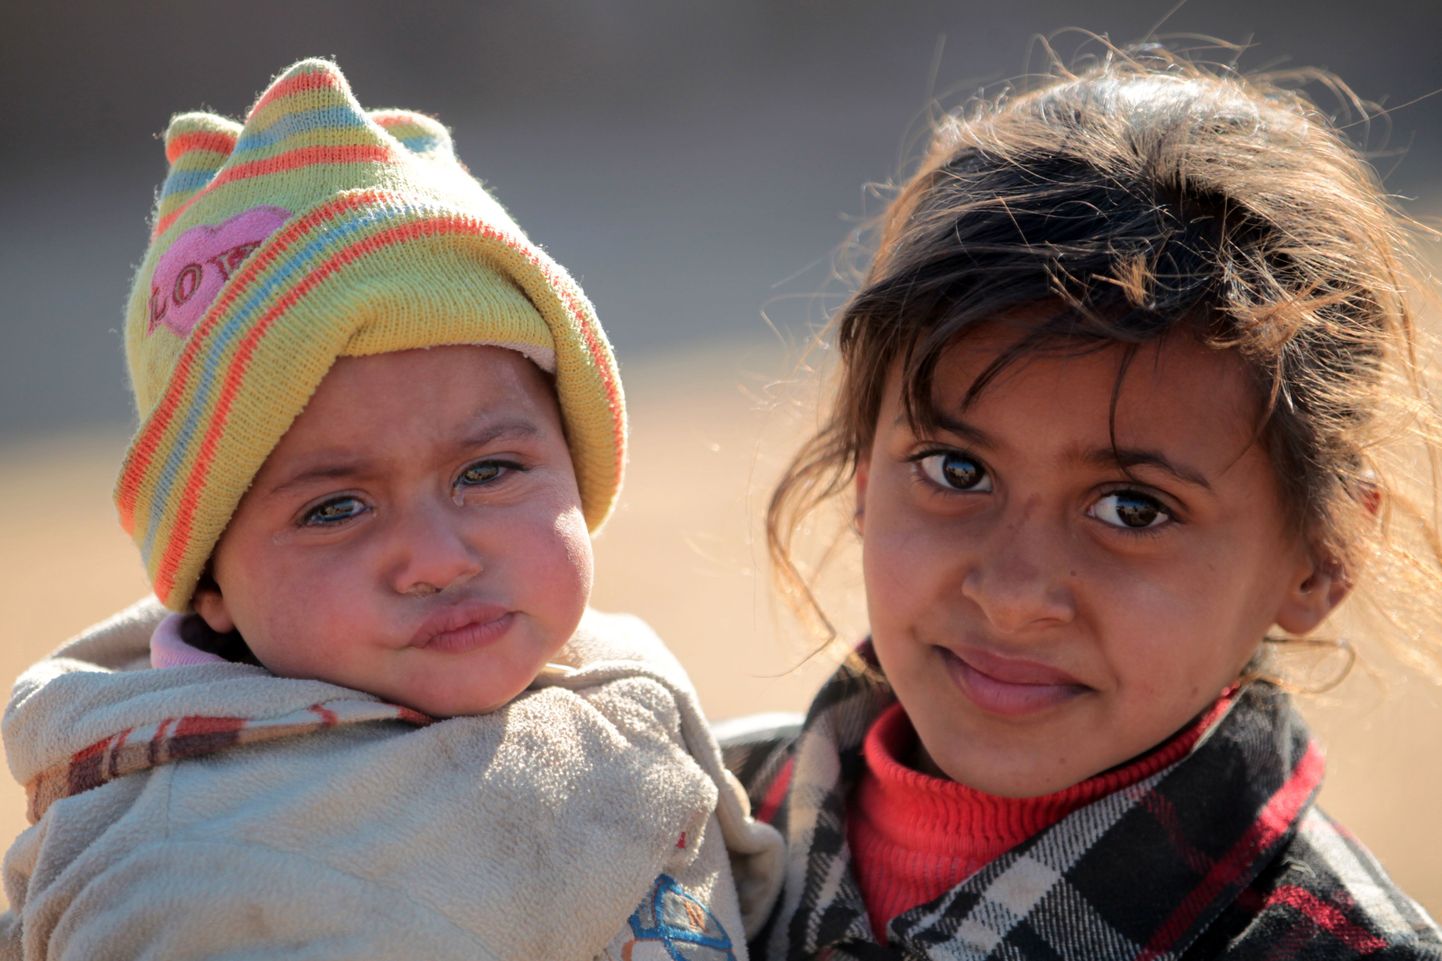 Displaced Iraqi children, from the outskirts of the city of Tal Afar, pose at a makeshift camp on December 12, 2016 in the village of Khalif Saleh, south of Tal Afar, where their family found refuge as Iraqi forces continue their assault to eject Islamic State (IS) group jihadists from Mosul, their last Iraqi stronghold.
The Hashed al-Shaabi forces have been fighting on a western front, in a campaign aimed at retaking the town of Tal-Afar and cutting IS supply lines between Mosul and Syria. / AFP PHOTO / AHMAD AL-RUBAYE